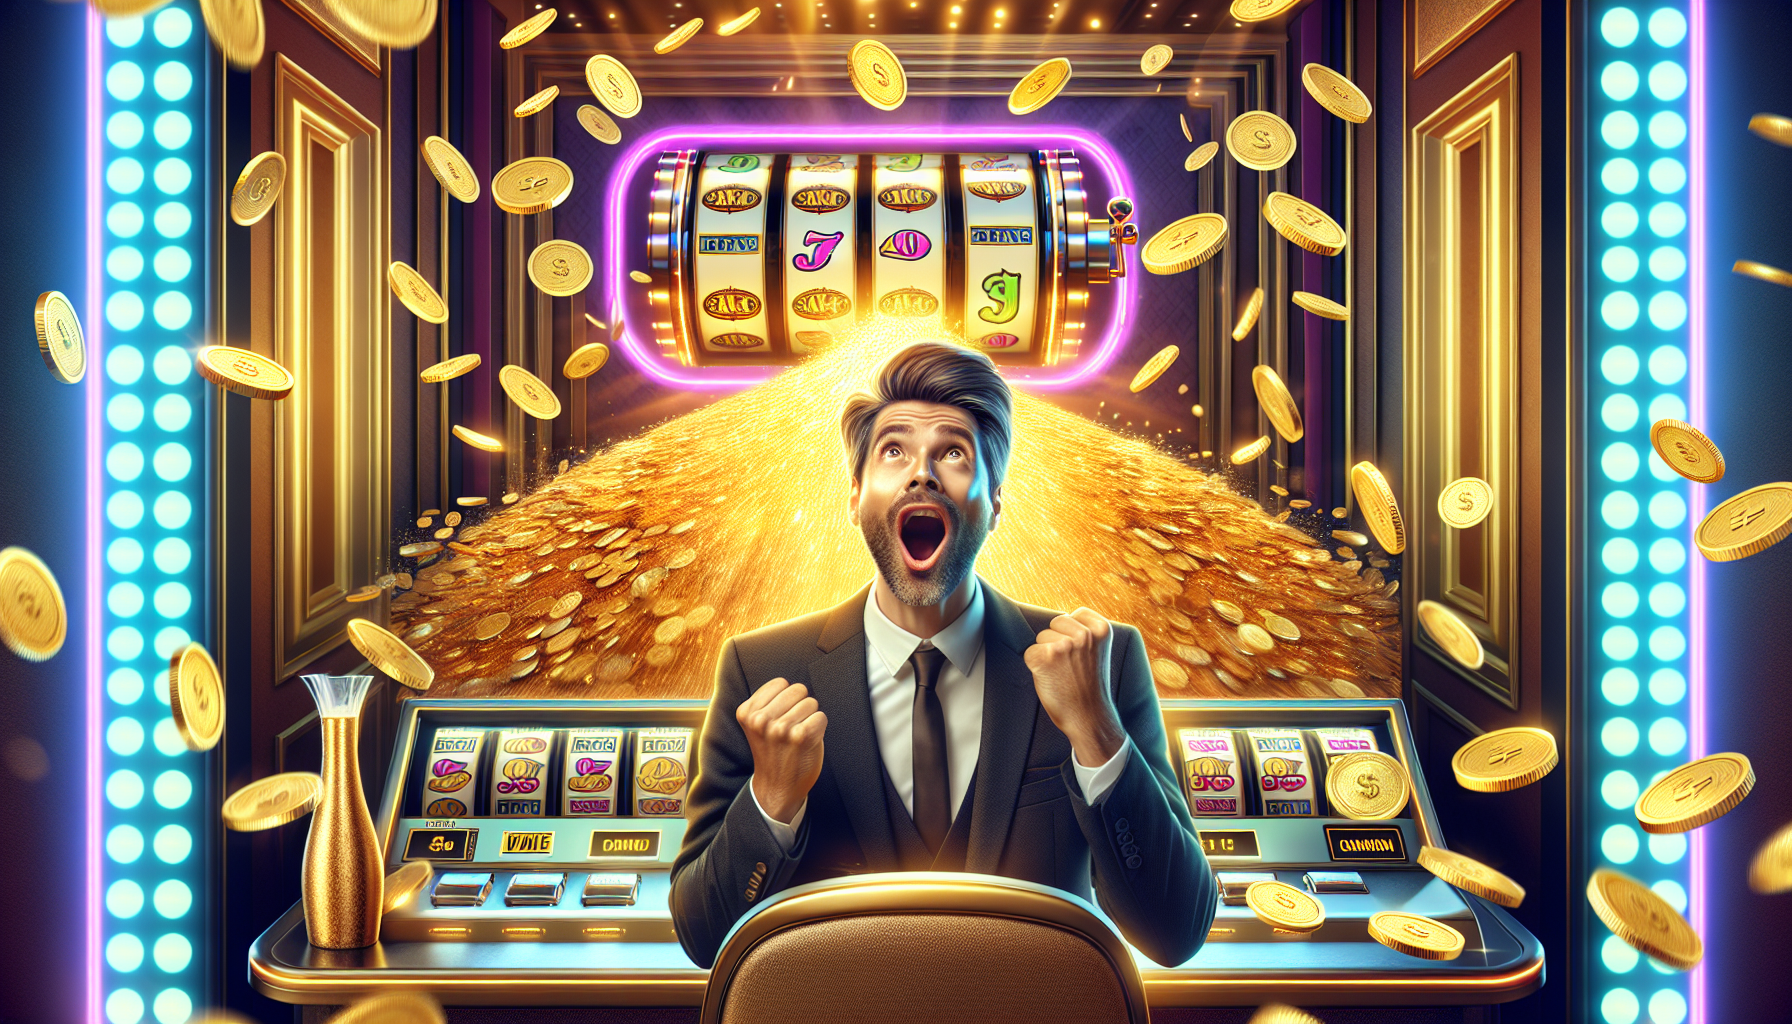 What Is The Highest Slots Win?